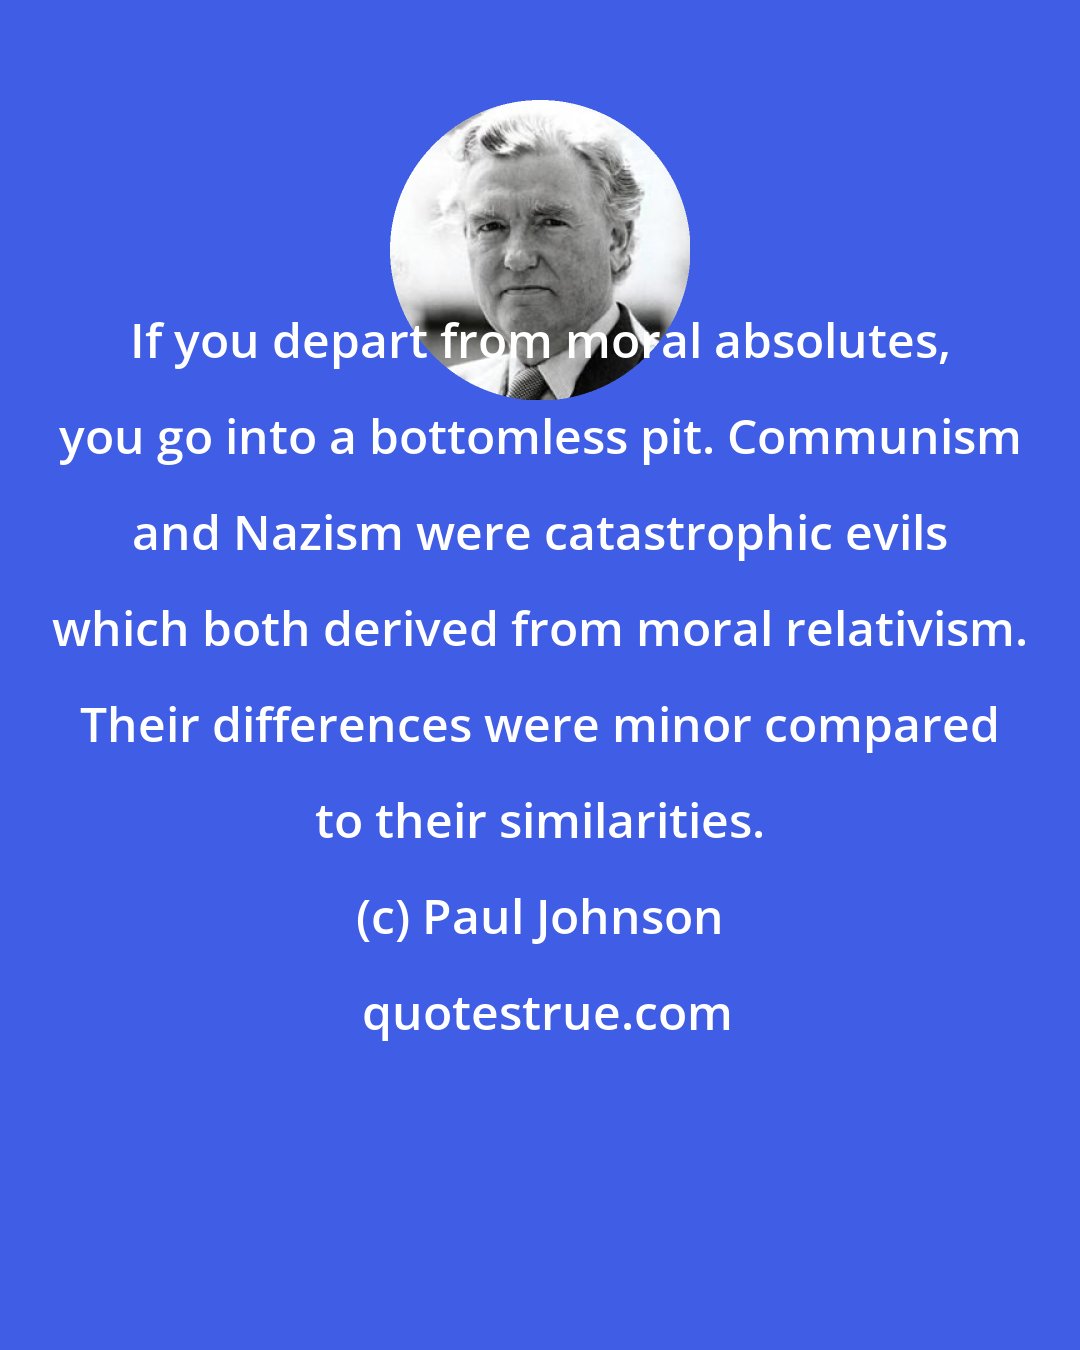 Paul Johnson: If you depart from moral absolutes, you go into a bottomless pit. Communism and Nazism were catastrophic evils which both derived from moral relativism. Their differences were minor compared to their similarities.